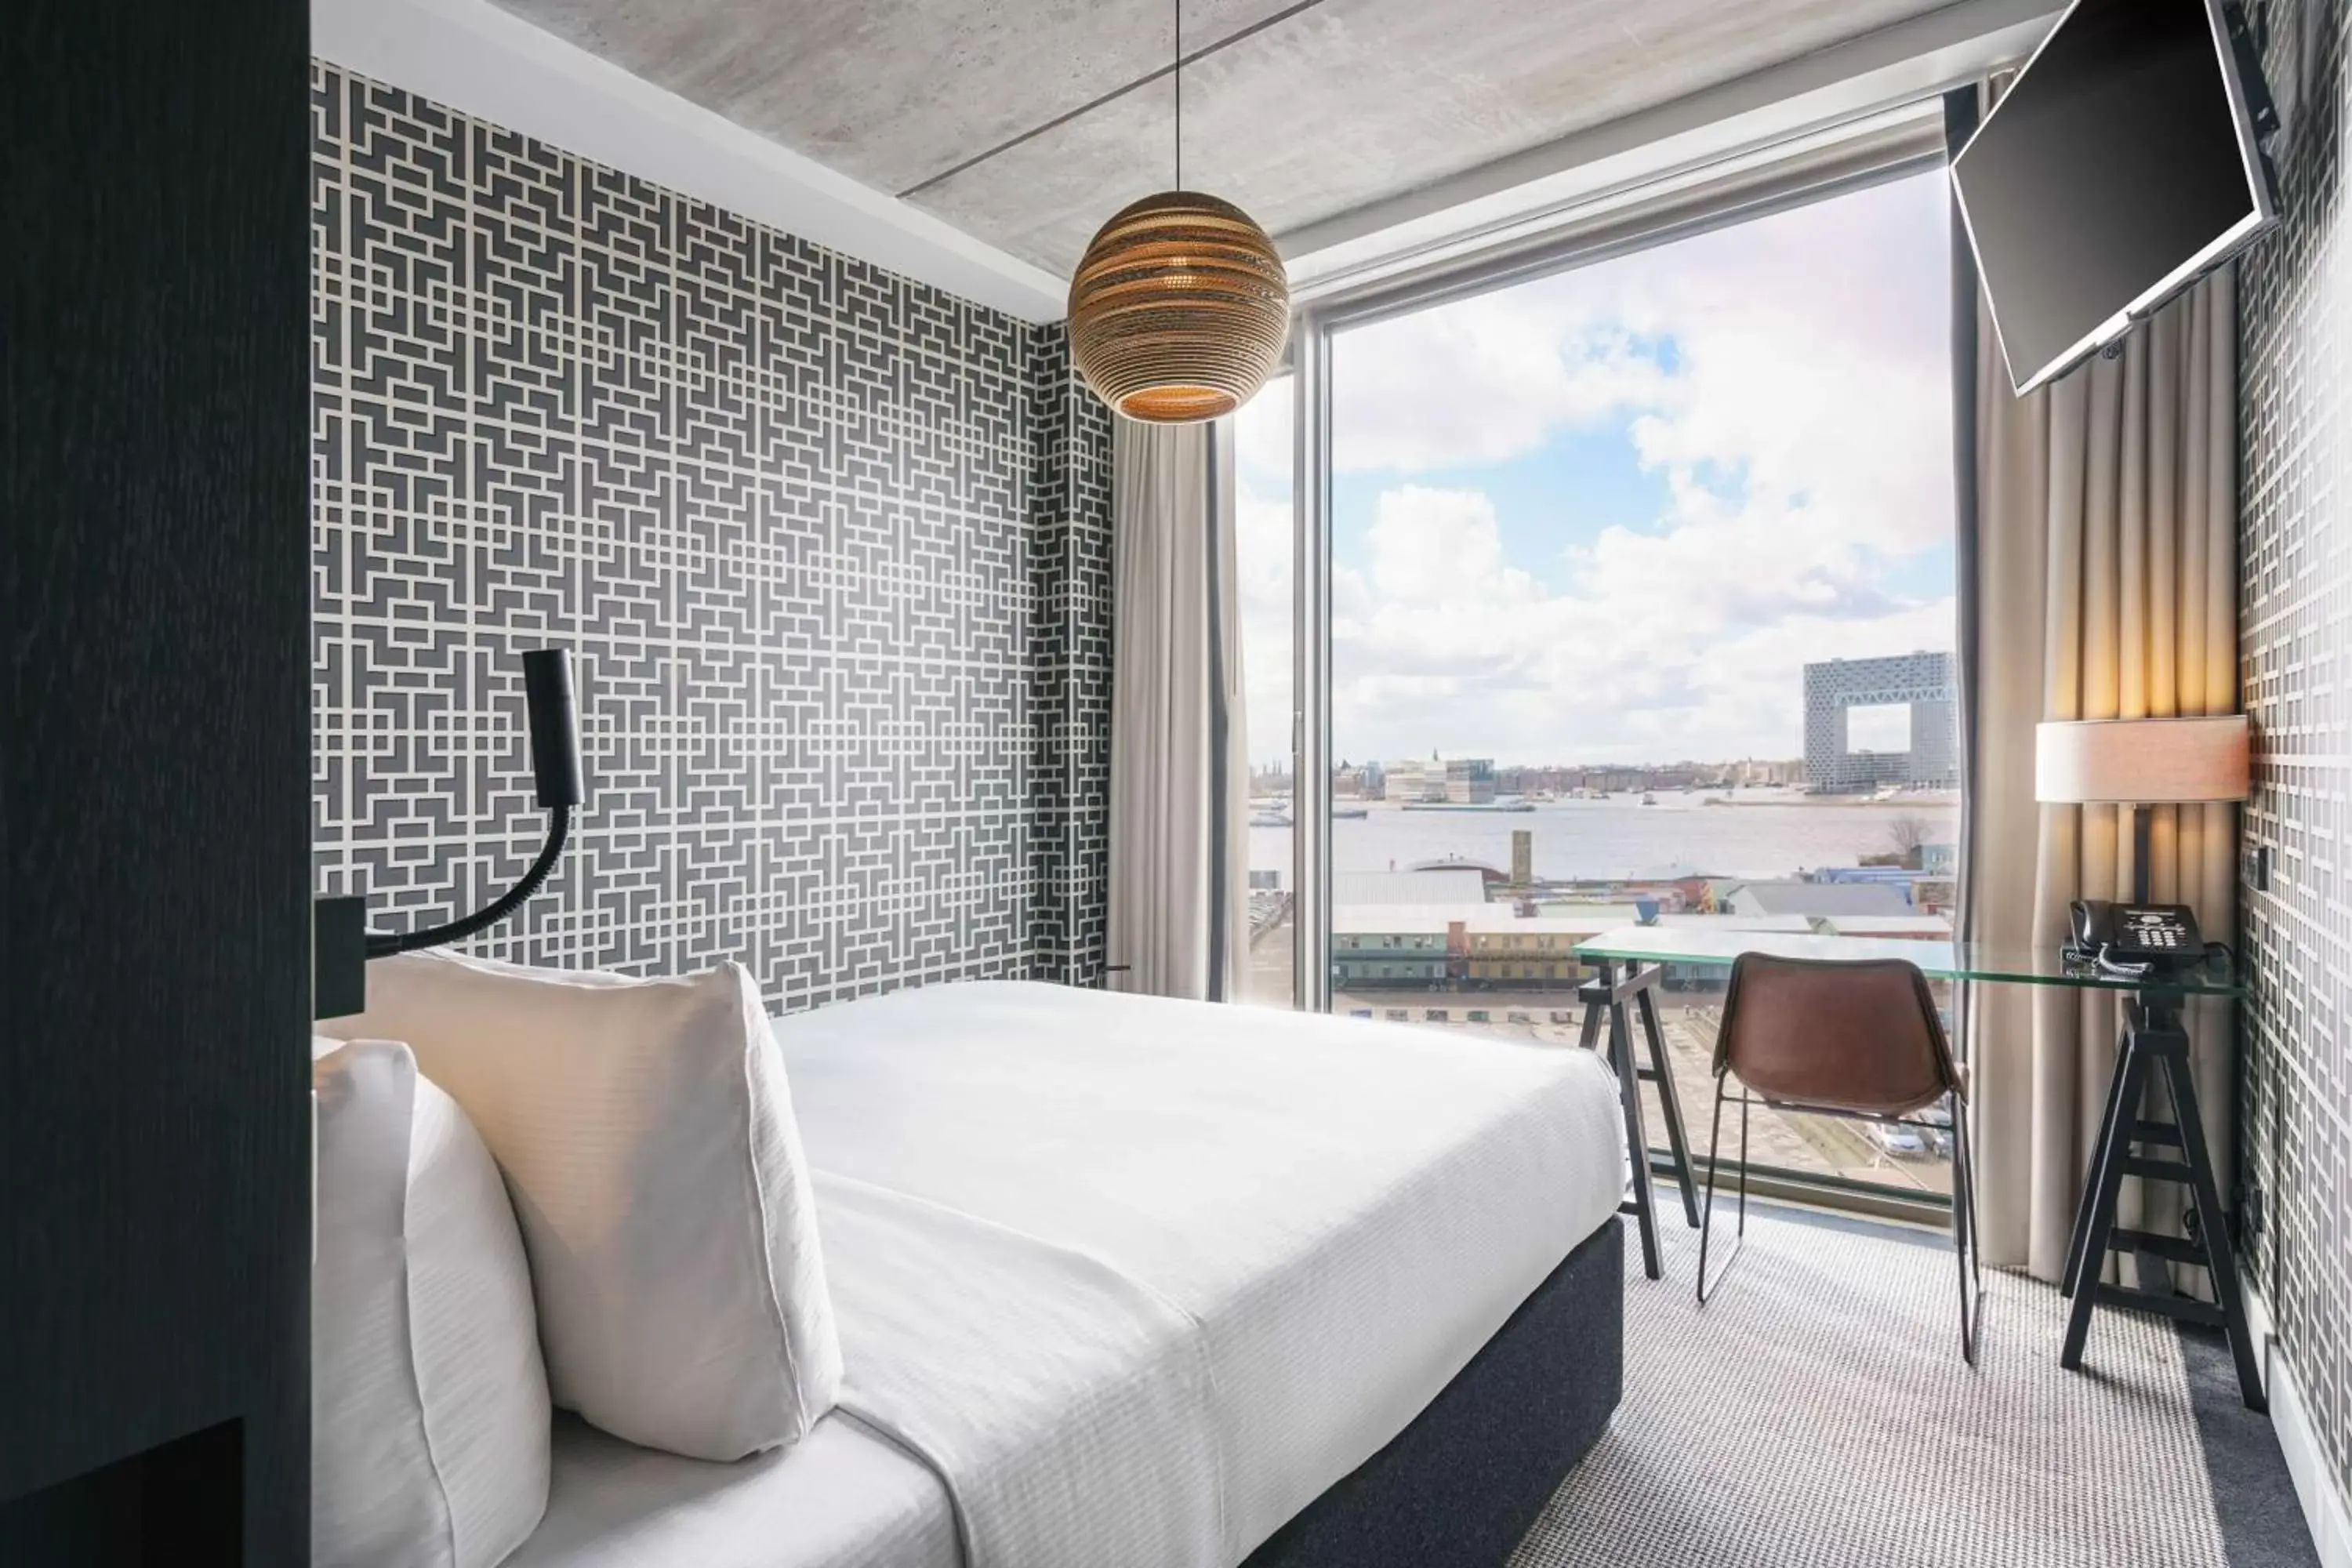 Bedroom in DoubleTree By Hilton Hotel Amsterdam - Ndsm Wharf